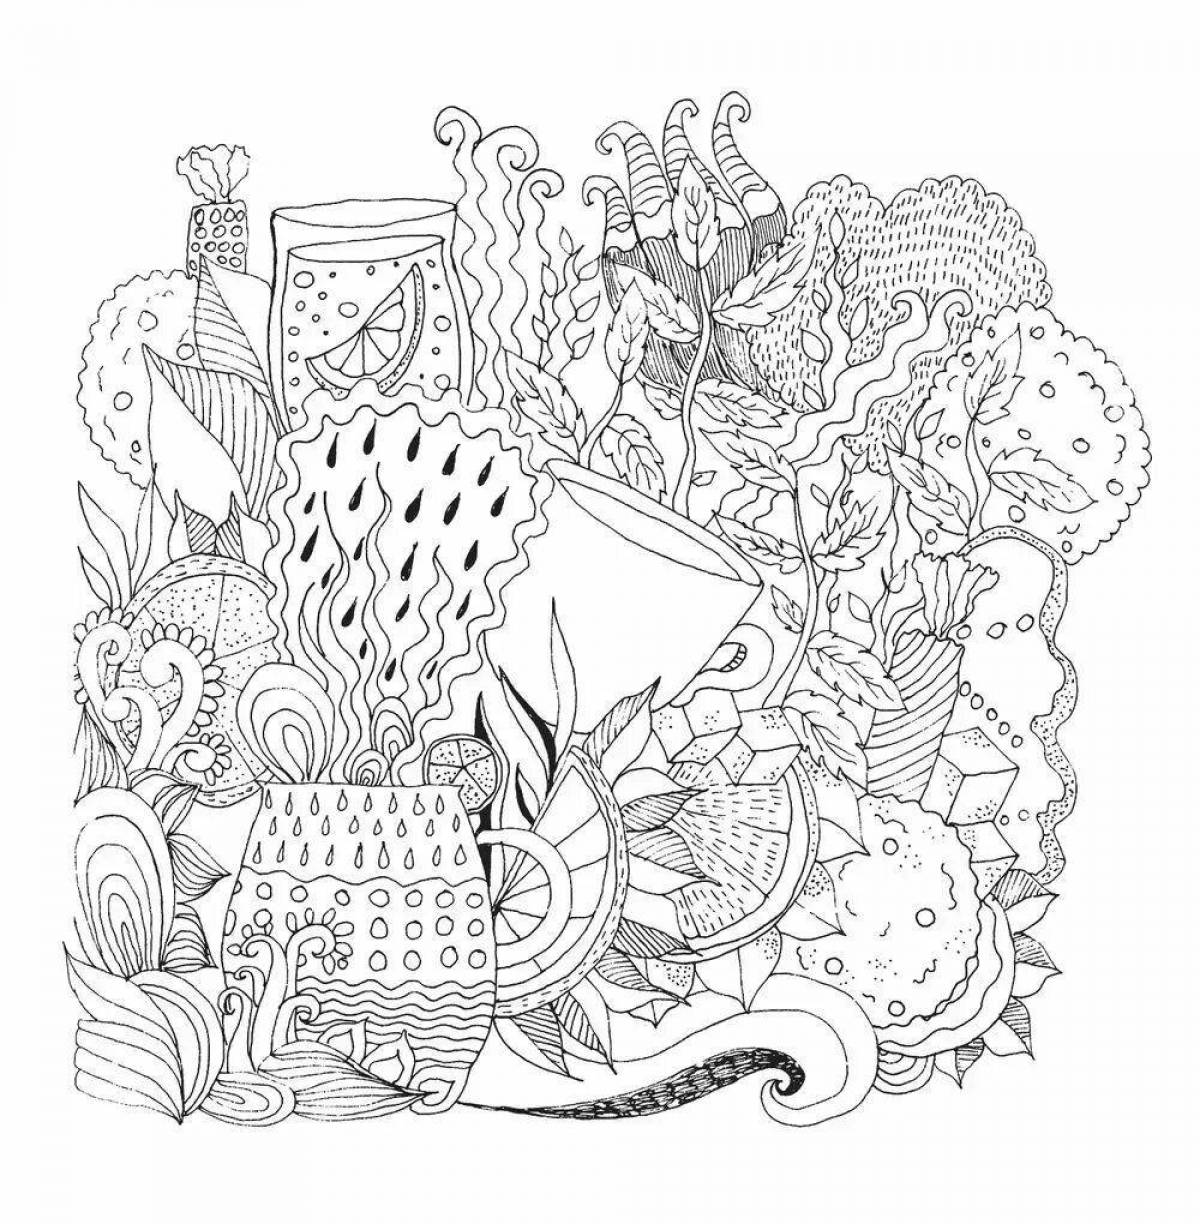 Hygge relaxing coloring book